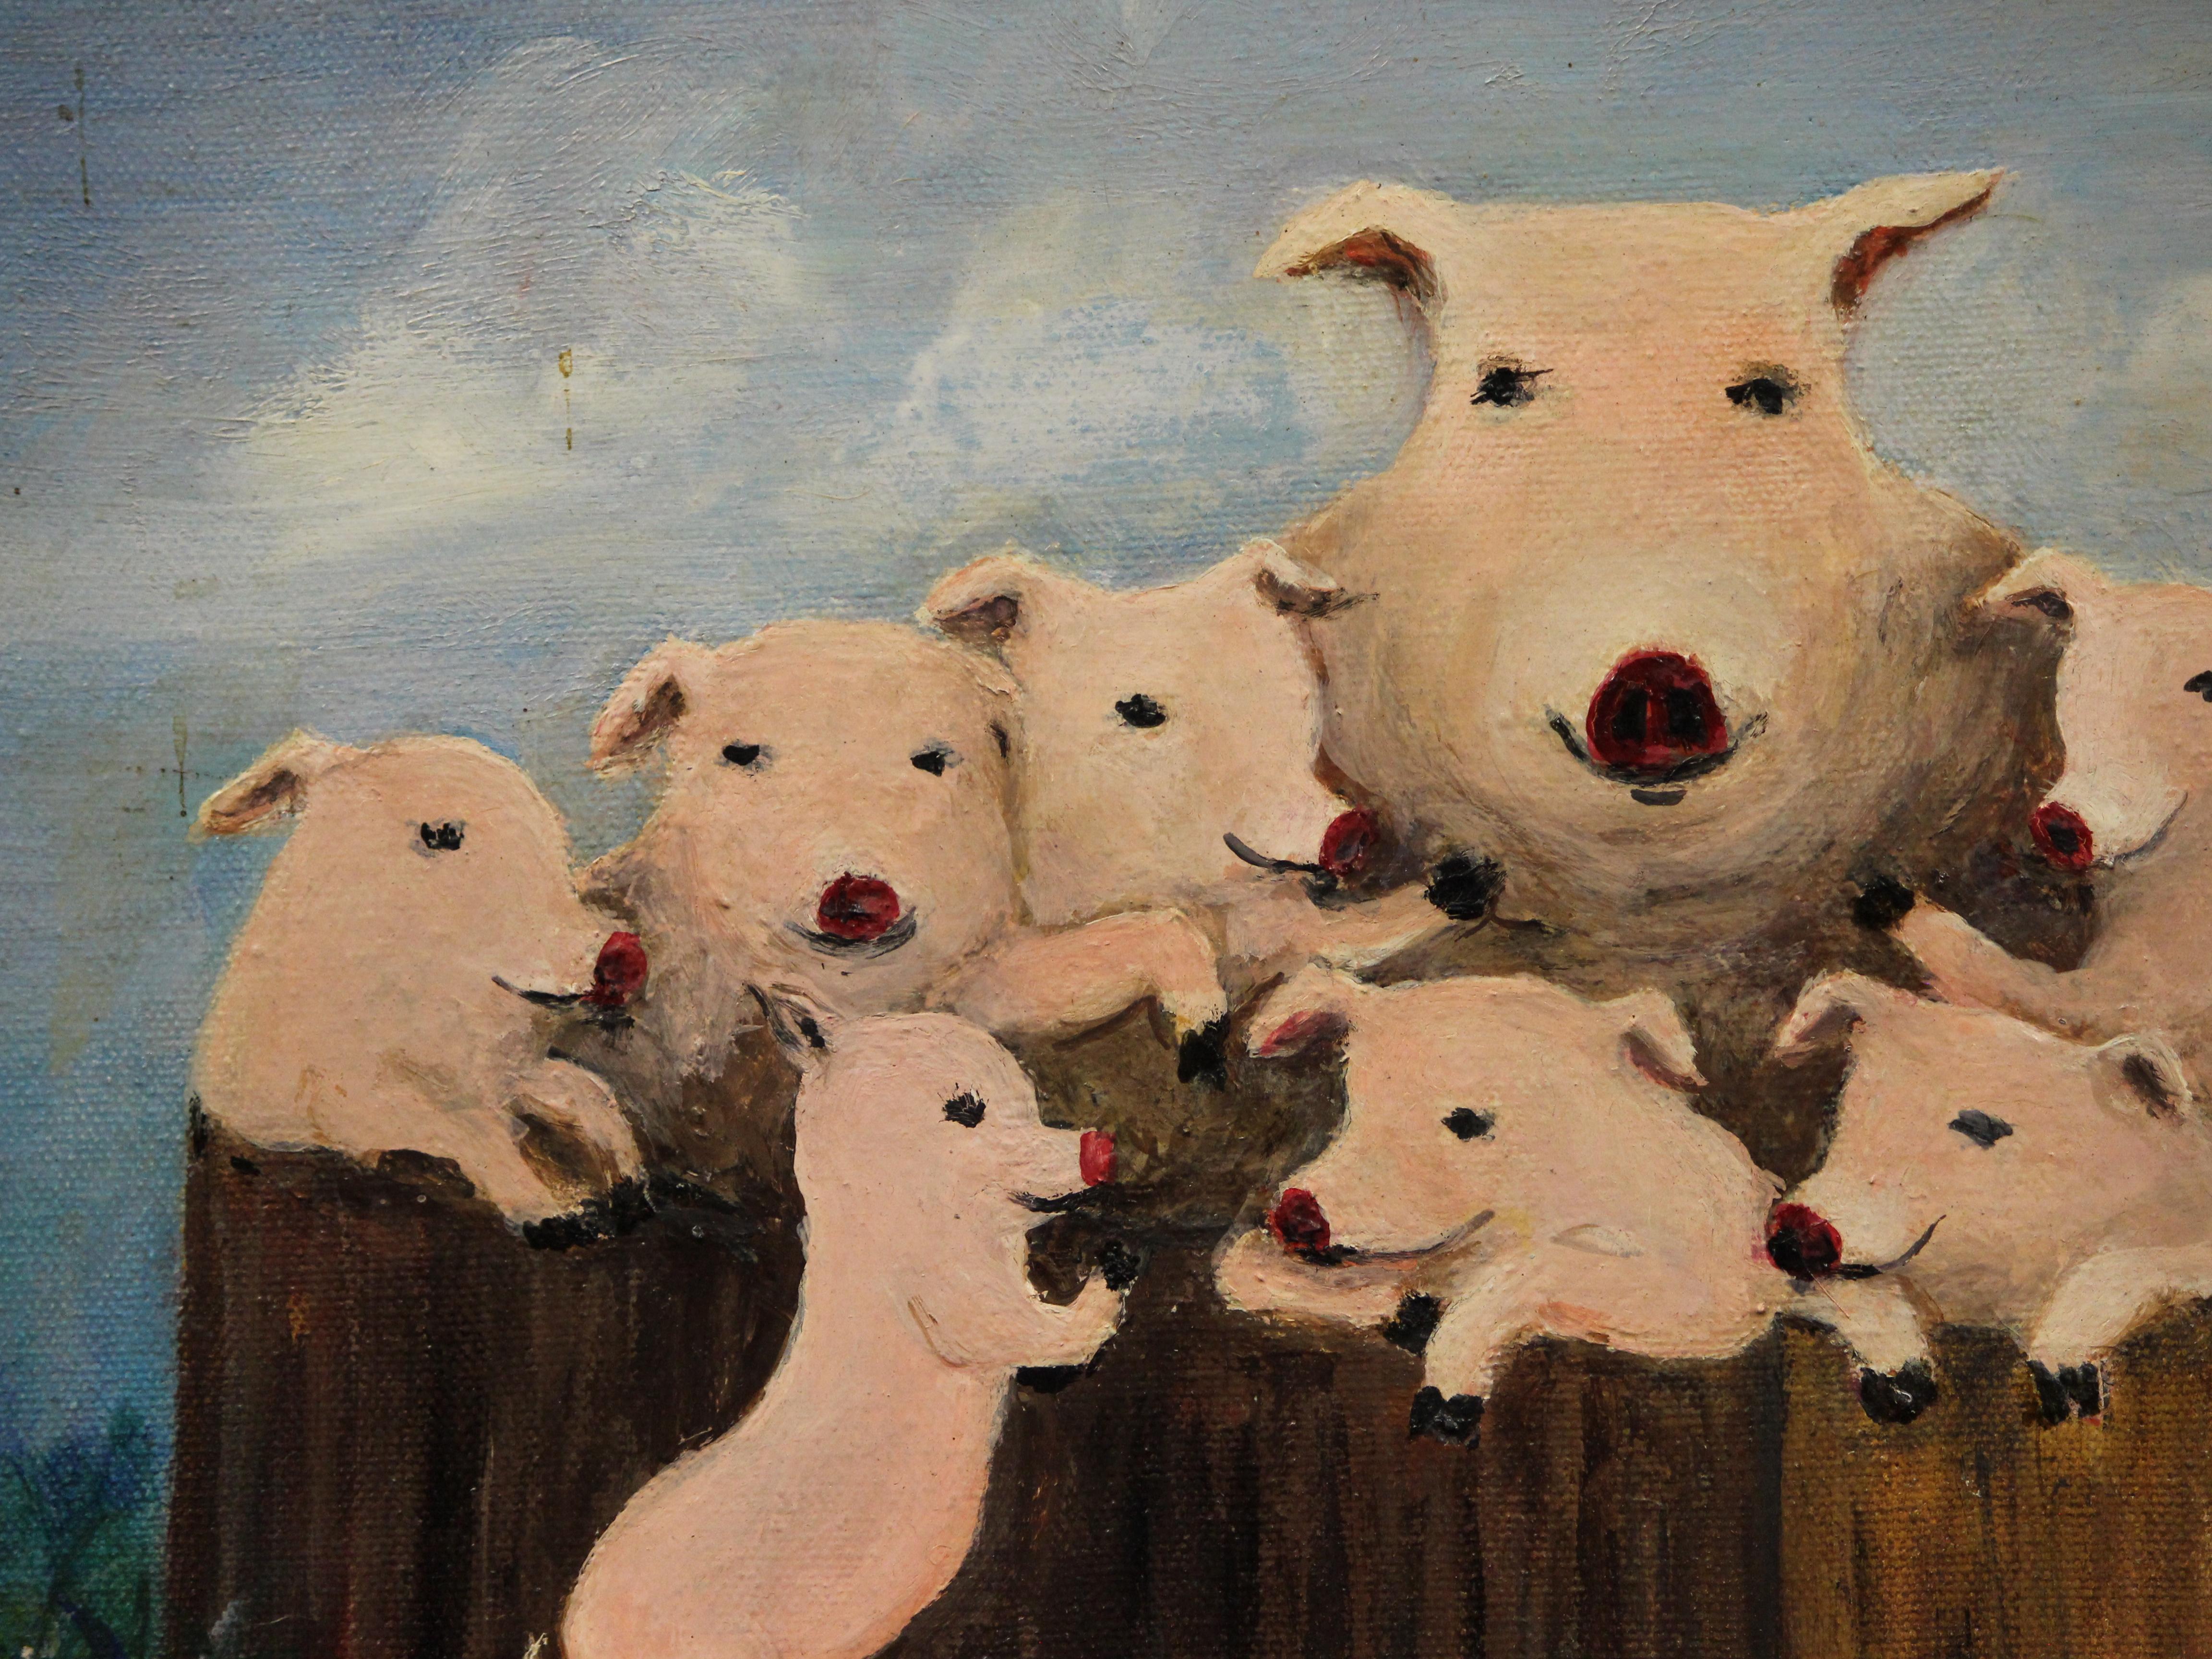 Delightful c1980s oil on canvas depicting a happy 'piglet' family of (8) by (Bobby) Livingston (Broadway producer)

Art Sz: 10 1/2